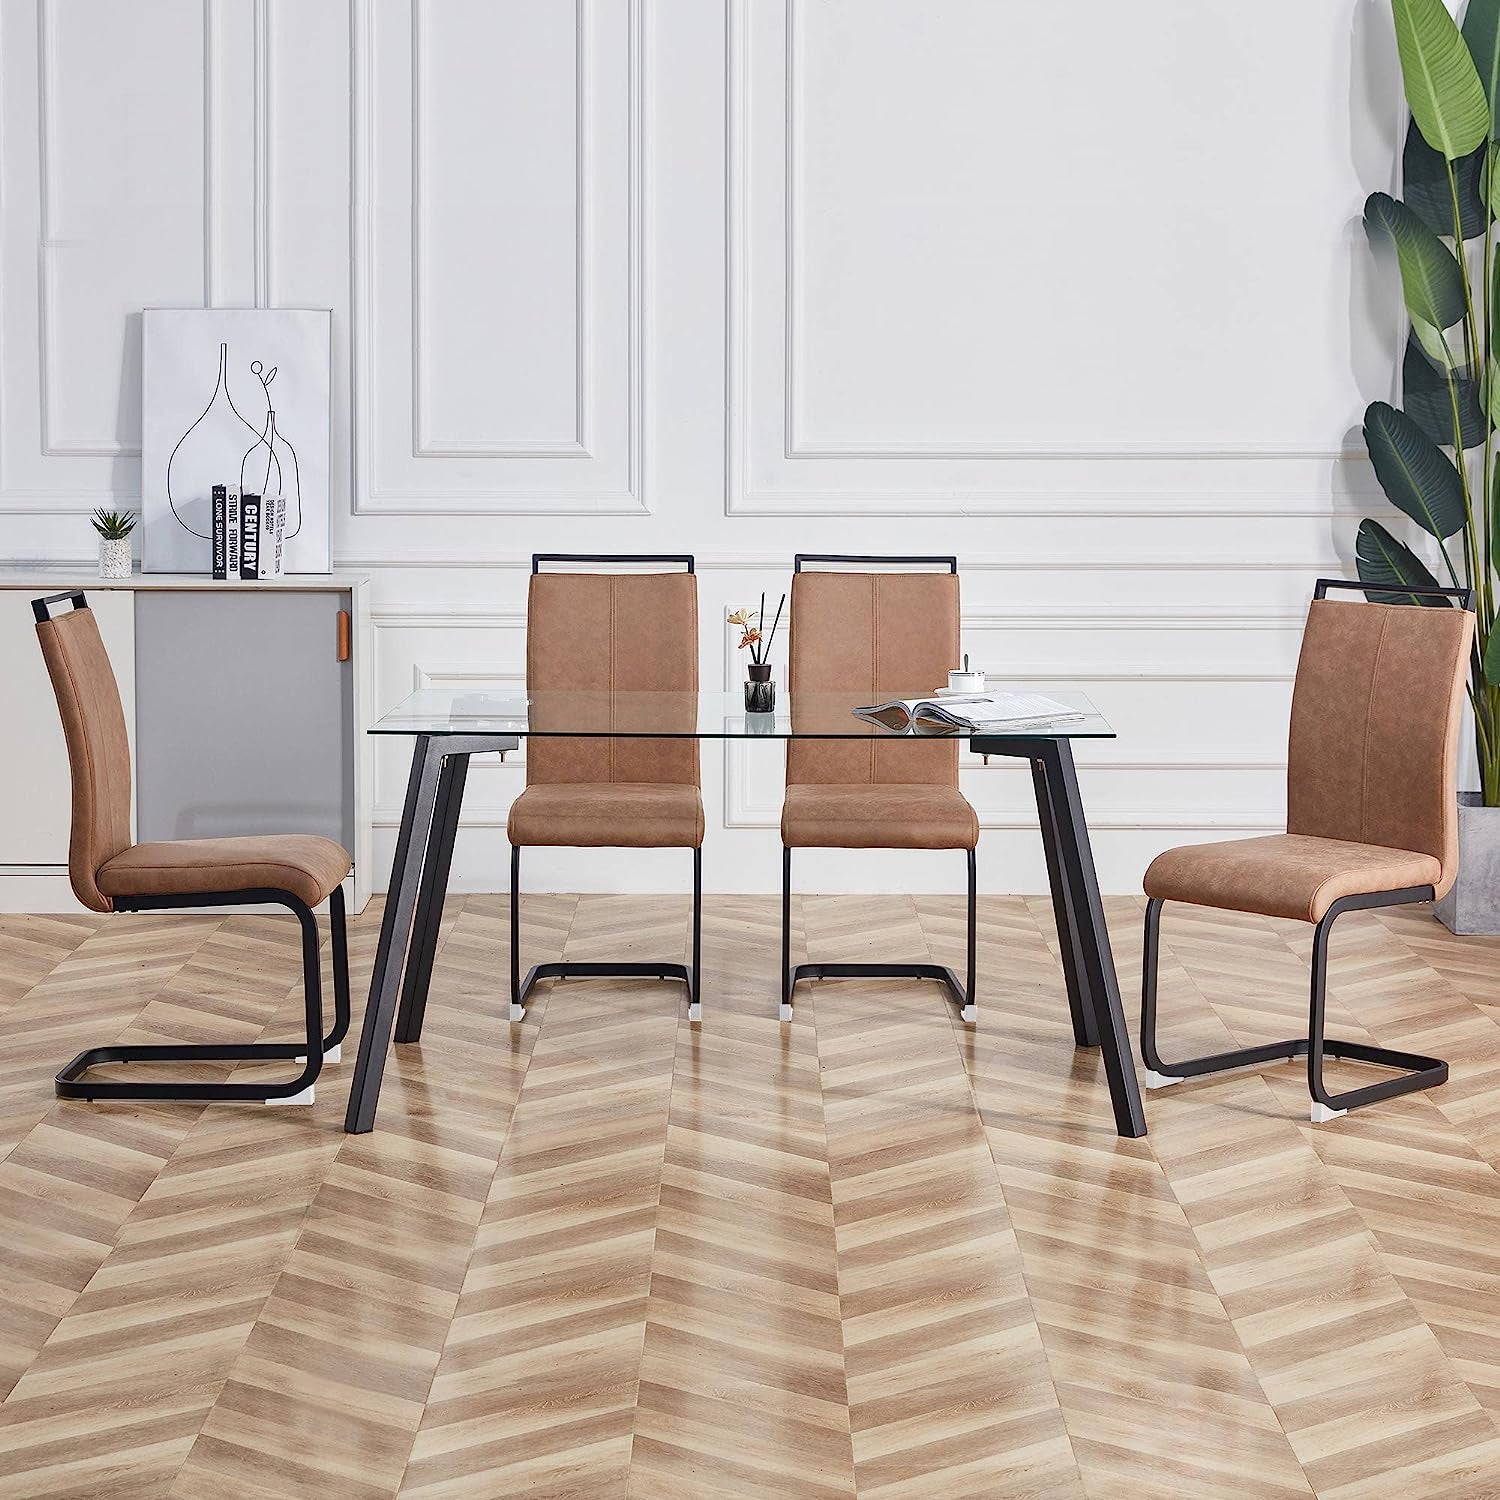 Leathaire Padded Dining Chairs Set of 4 with Metal Legs